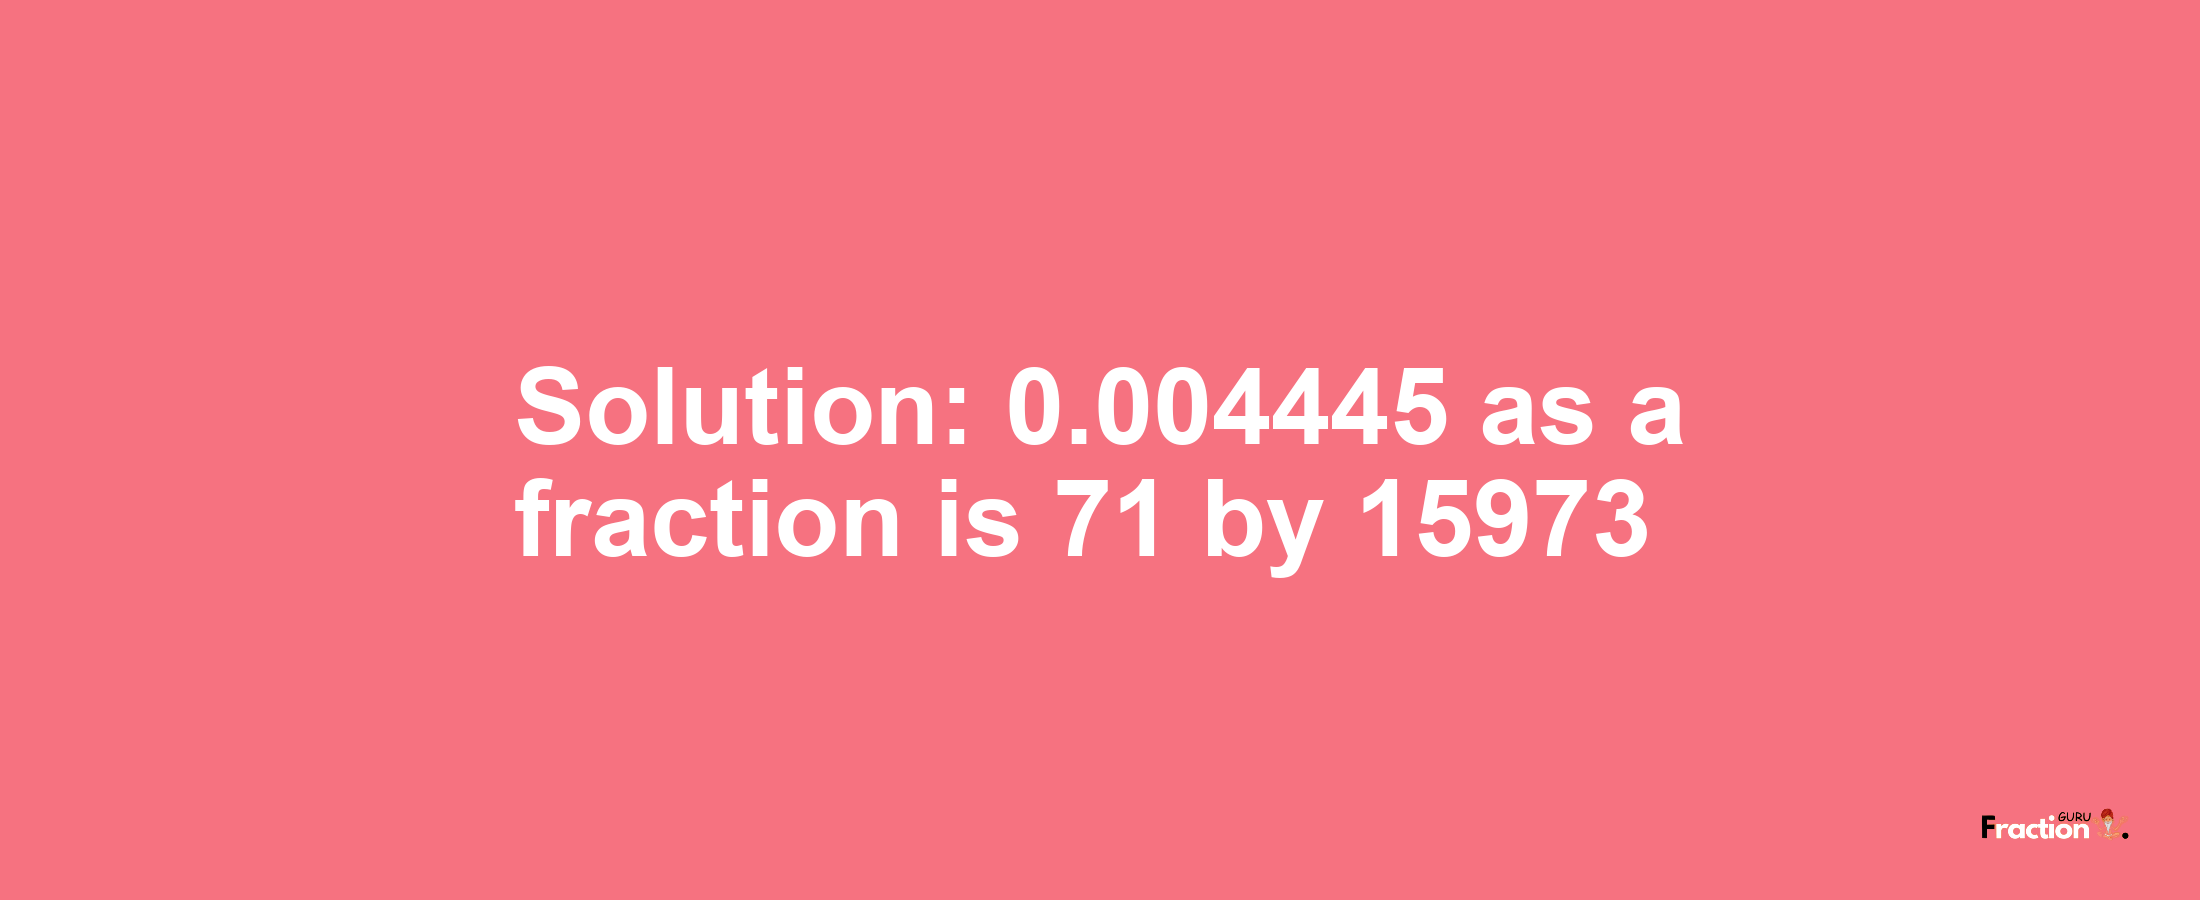 Solution:0.004445 as a fraction is 71/15973